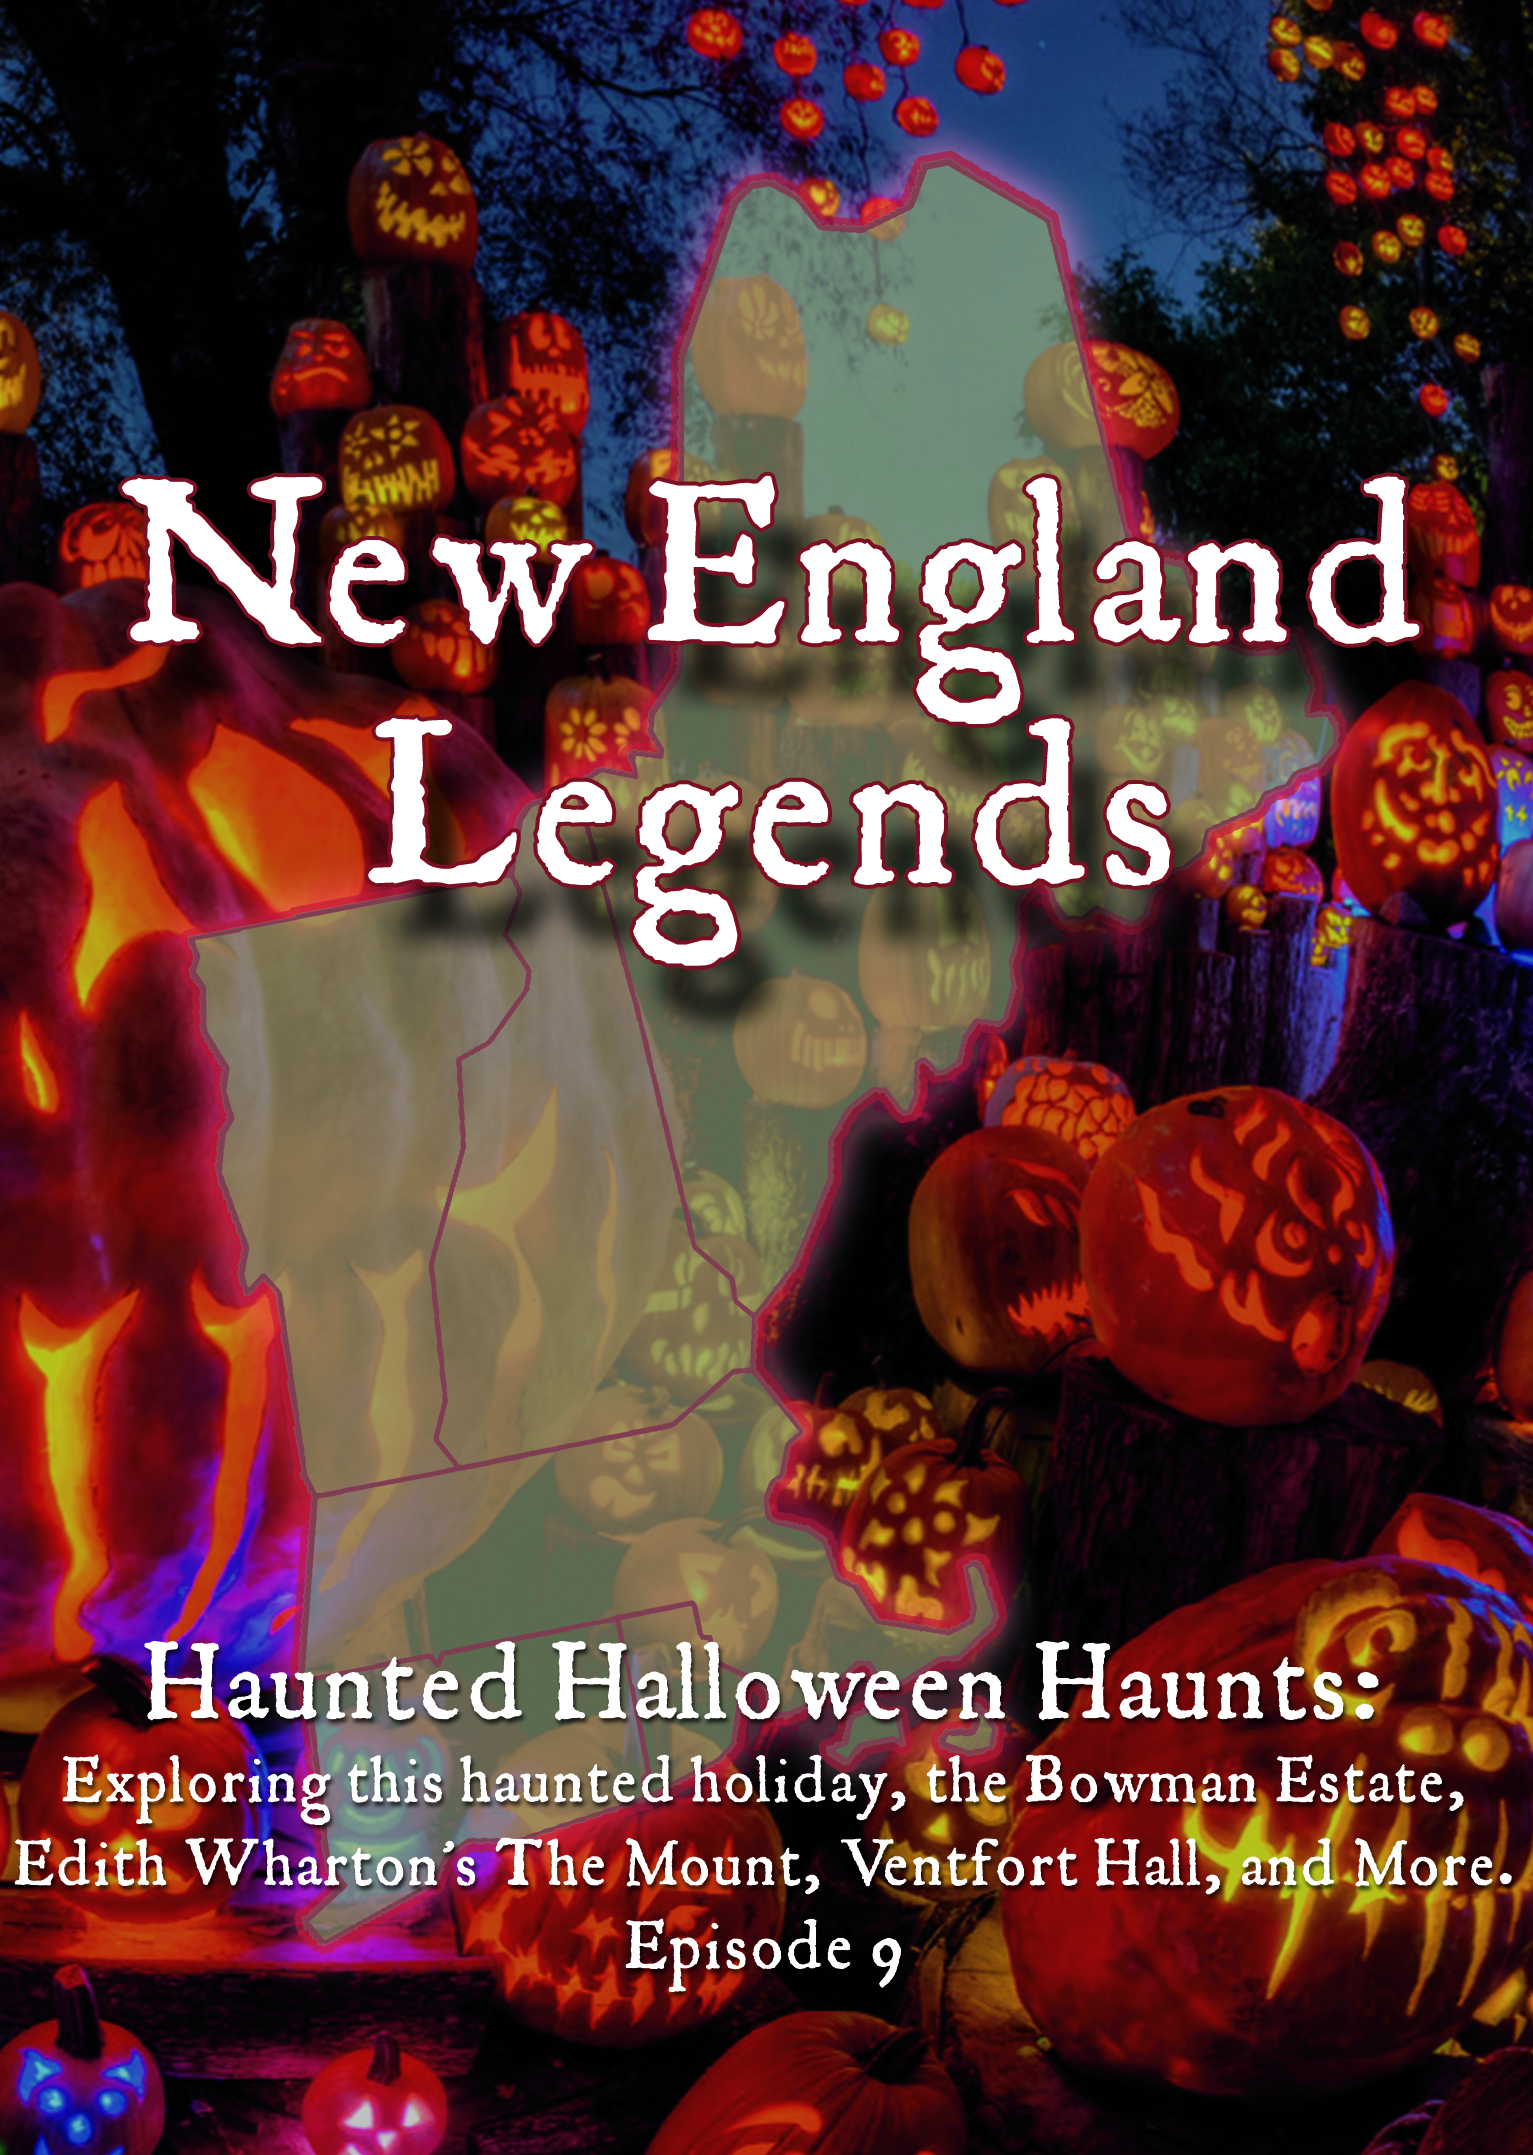 Episode 9 – Haunted Halloween Haunts: Exploring this haunted holiday, the Bowman Estate, Edith Wharton’s The Mount, Ventfort Hall, and More